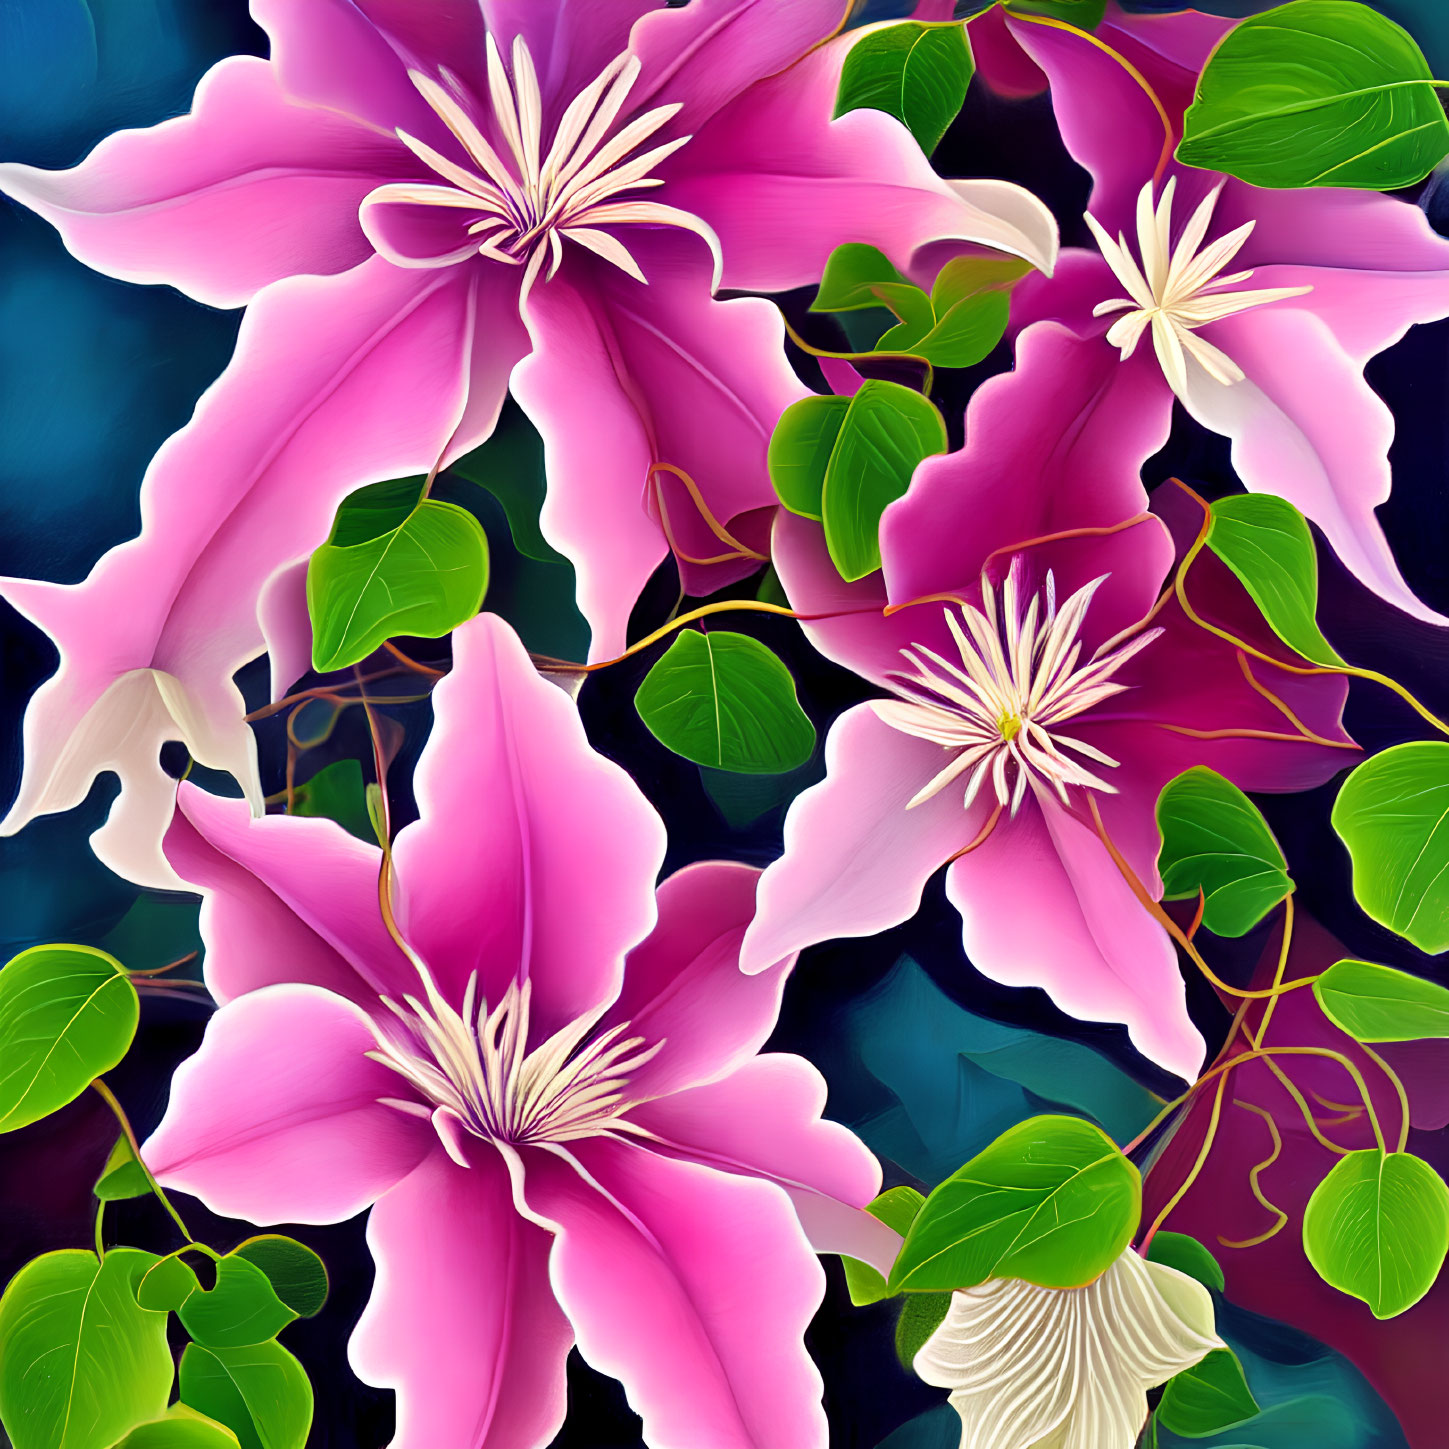 Colorful digital artwork featuring pink clematis flowers and green leaves on dark blue backdrop